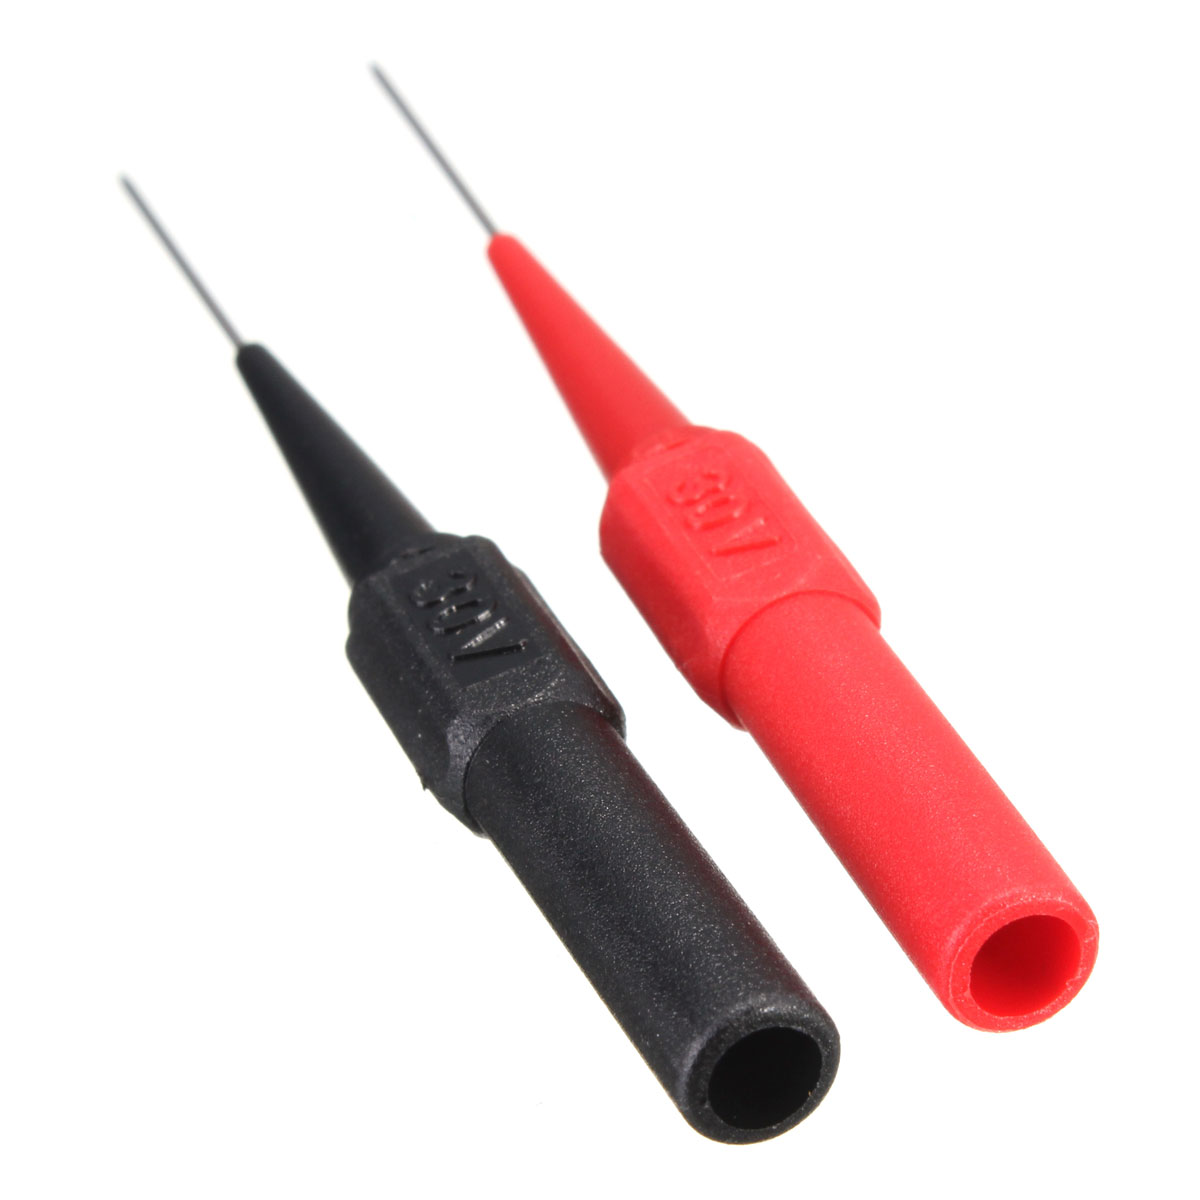 Pack Of 15 Bingsnow Non-Destructive Pin Test Probes Insulation Piercing Needle